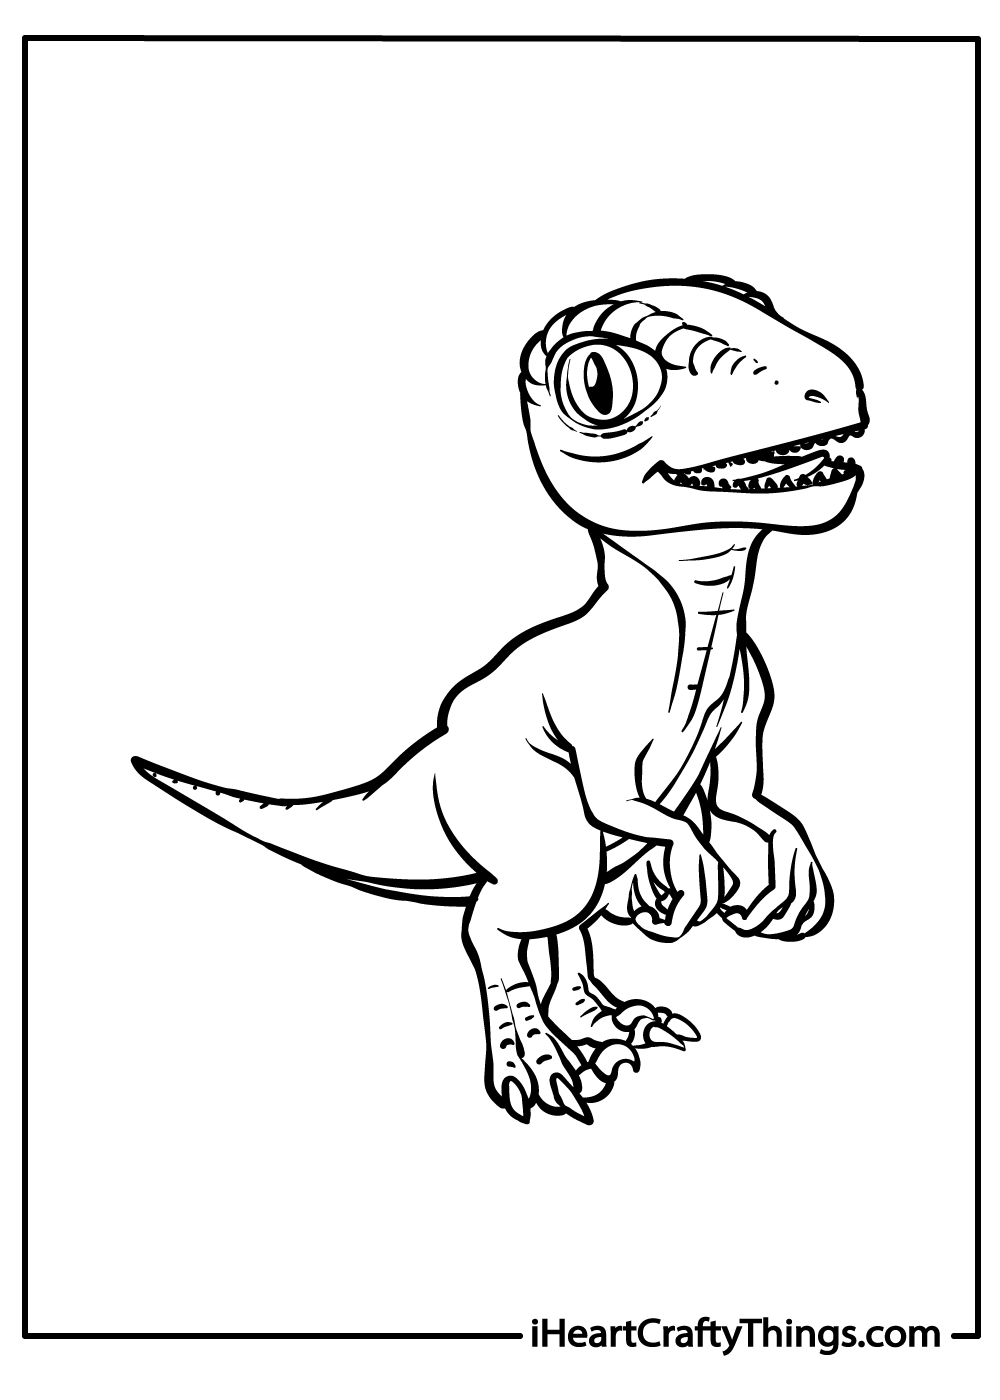 Velociraptor Coloring Pages for kids